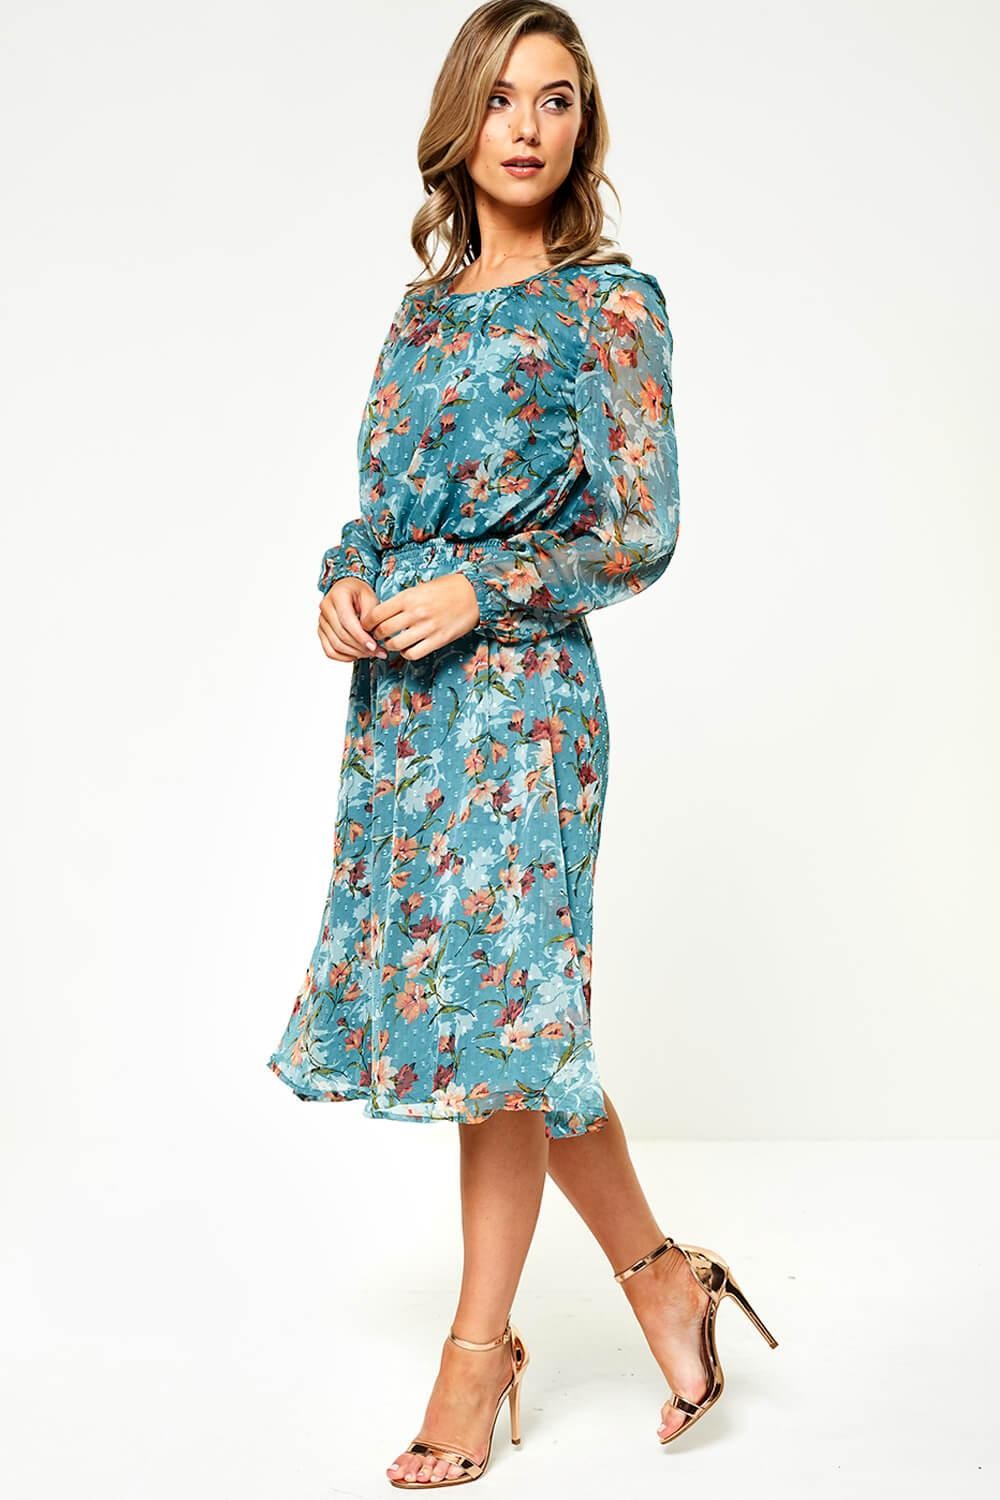 chiffon_overlay_dress_in_teal_floral_print-2